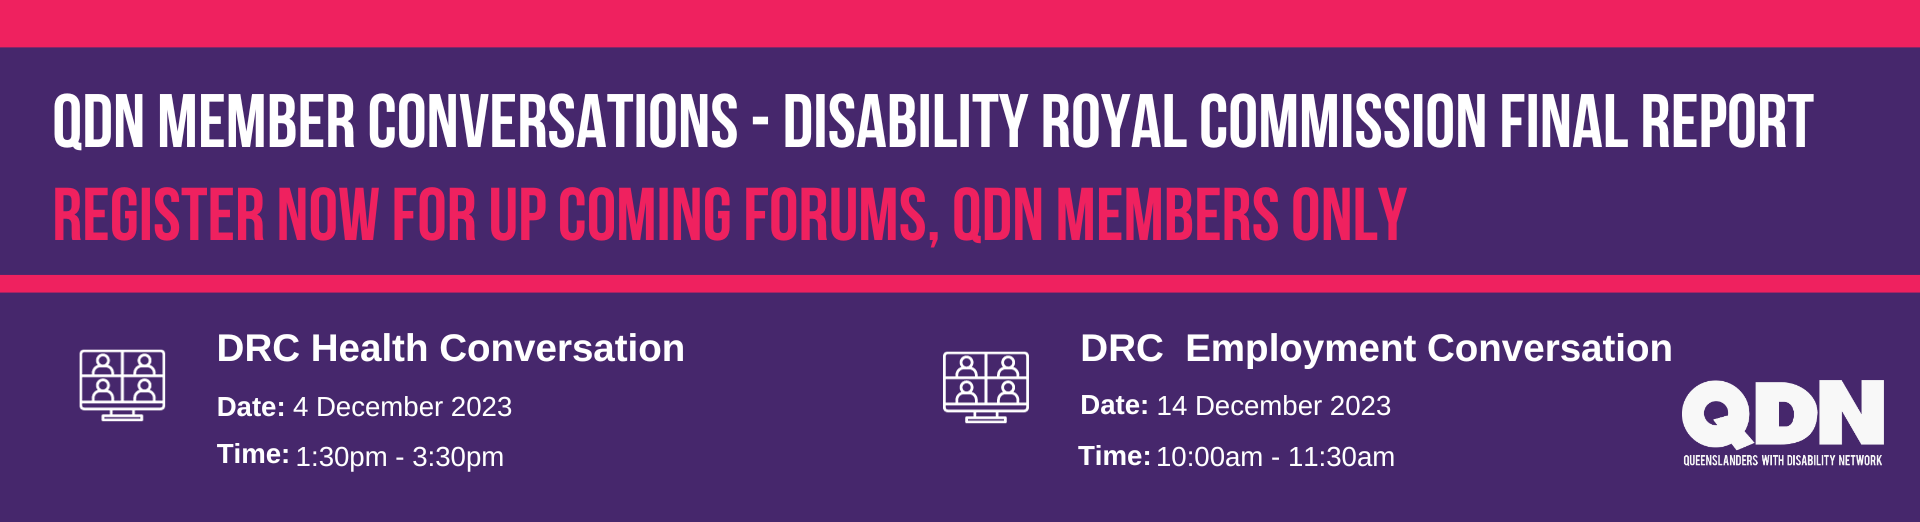 Image description: A dark blue background featuring intersecting red lines. White text, ‘QDN member conversation – Disability Royal Commission Final Report' with the QDN logo positioned in the bottom right corner. Event details are also provided: Event 1 is the Disability Commission Health Conversation scheduled for 4th December 2023, from 1:30pm to 3:30pm. Event 2 is the Disability Royal Commission Employment Conversation set for 14th December from 10:00am to 11:30am.